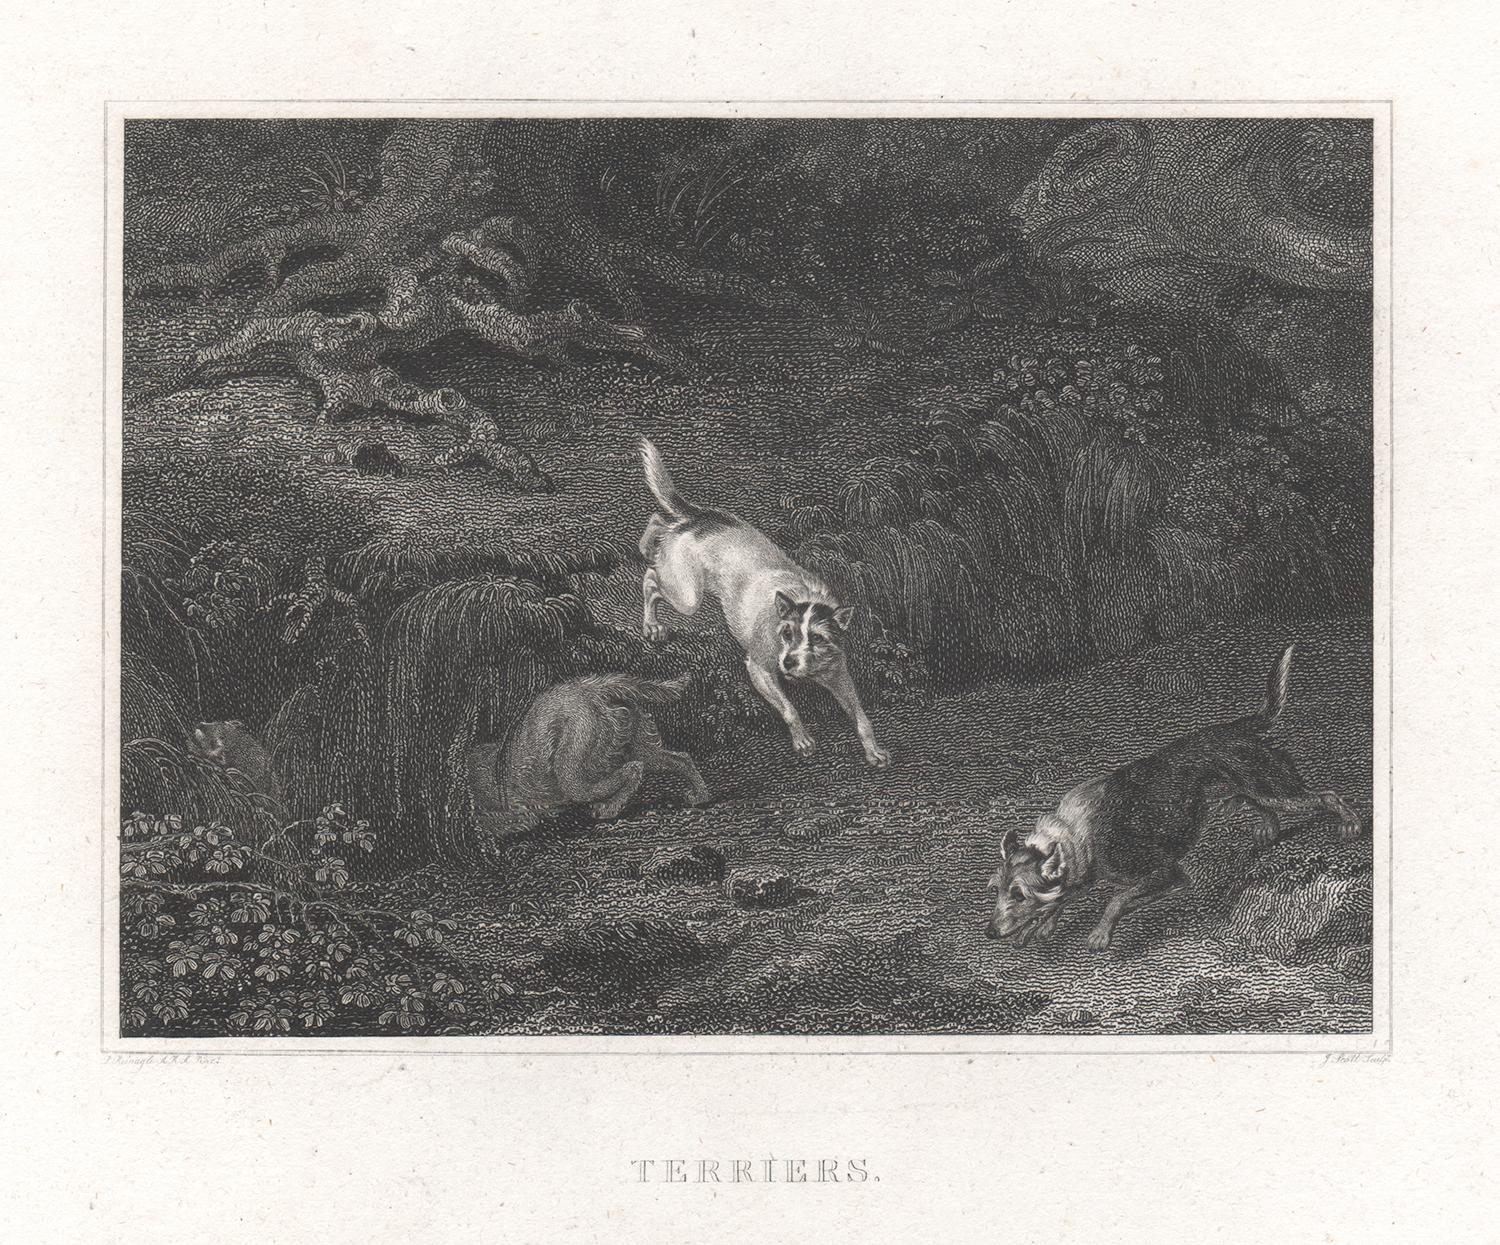 Terriers, early 19th century English dog engraving